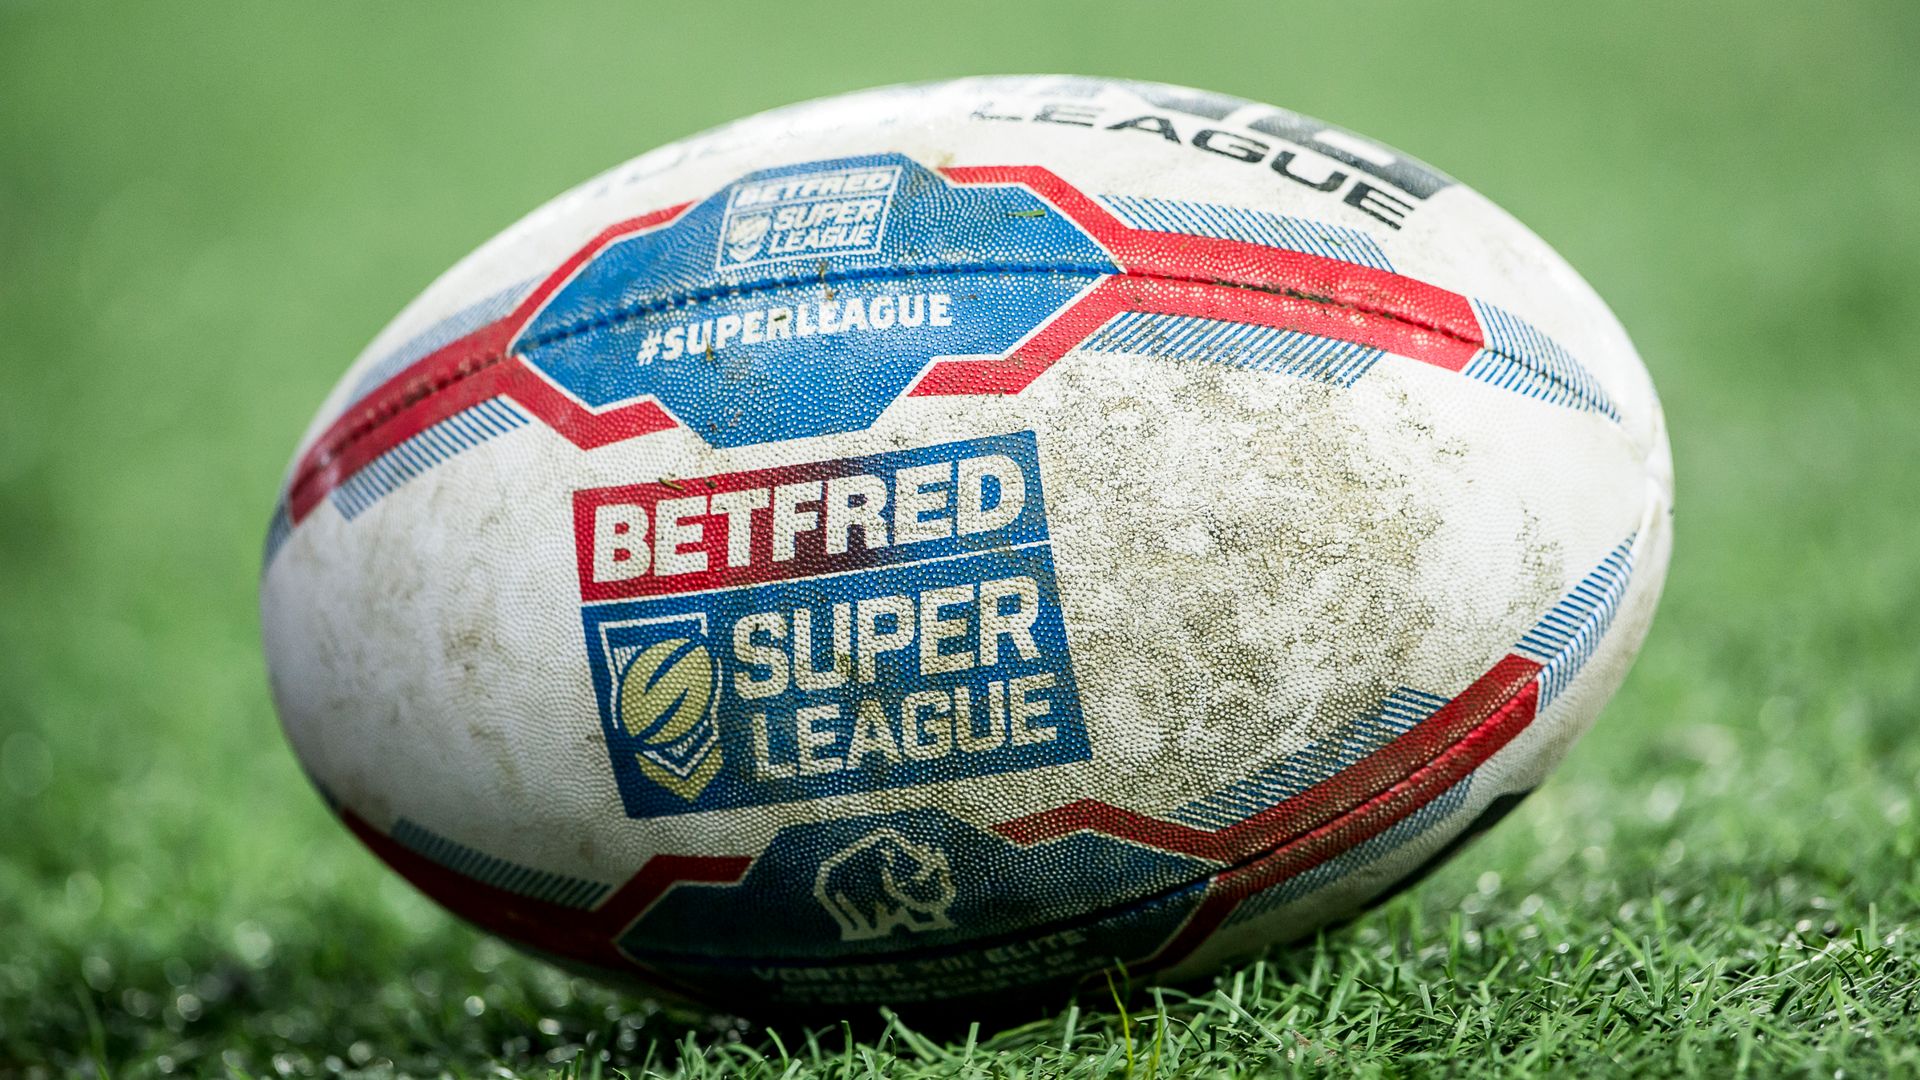 Sky to show Wigan vs Salford due to Wakefield pitch issues